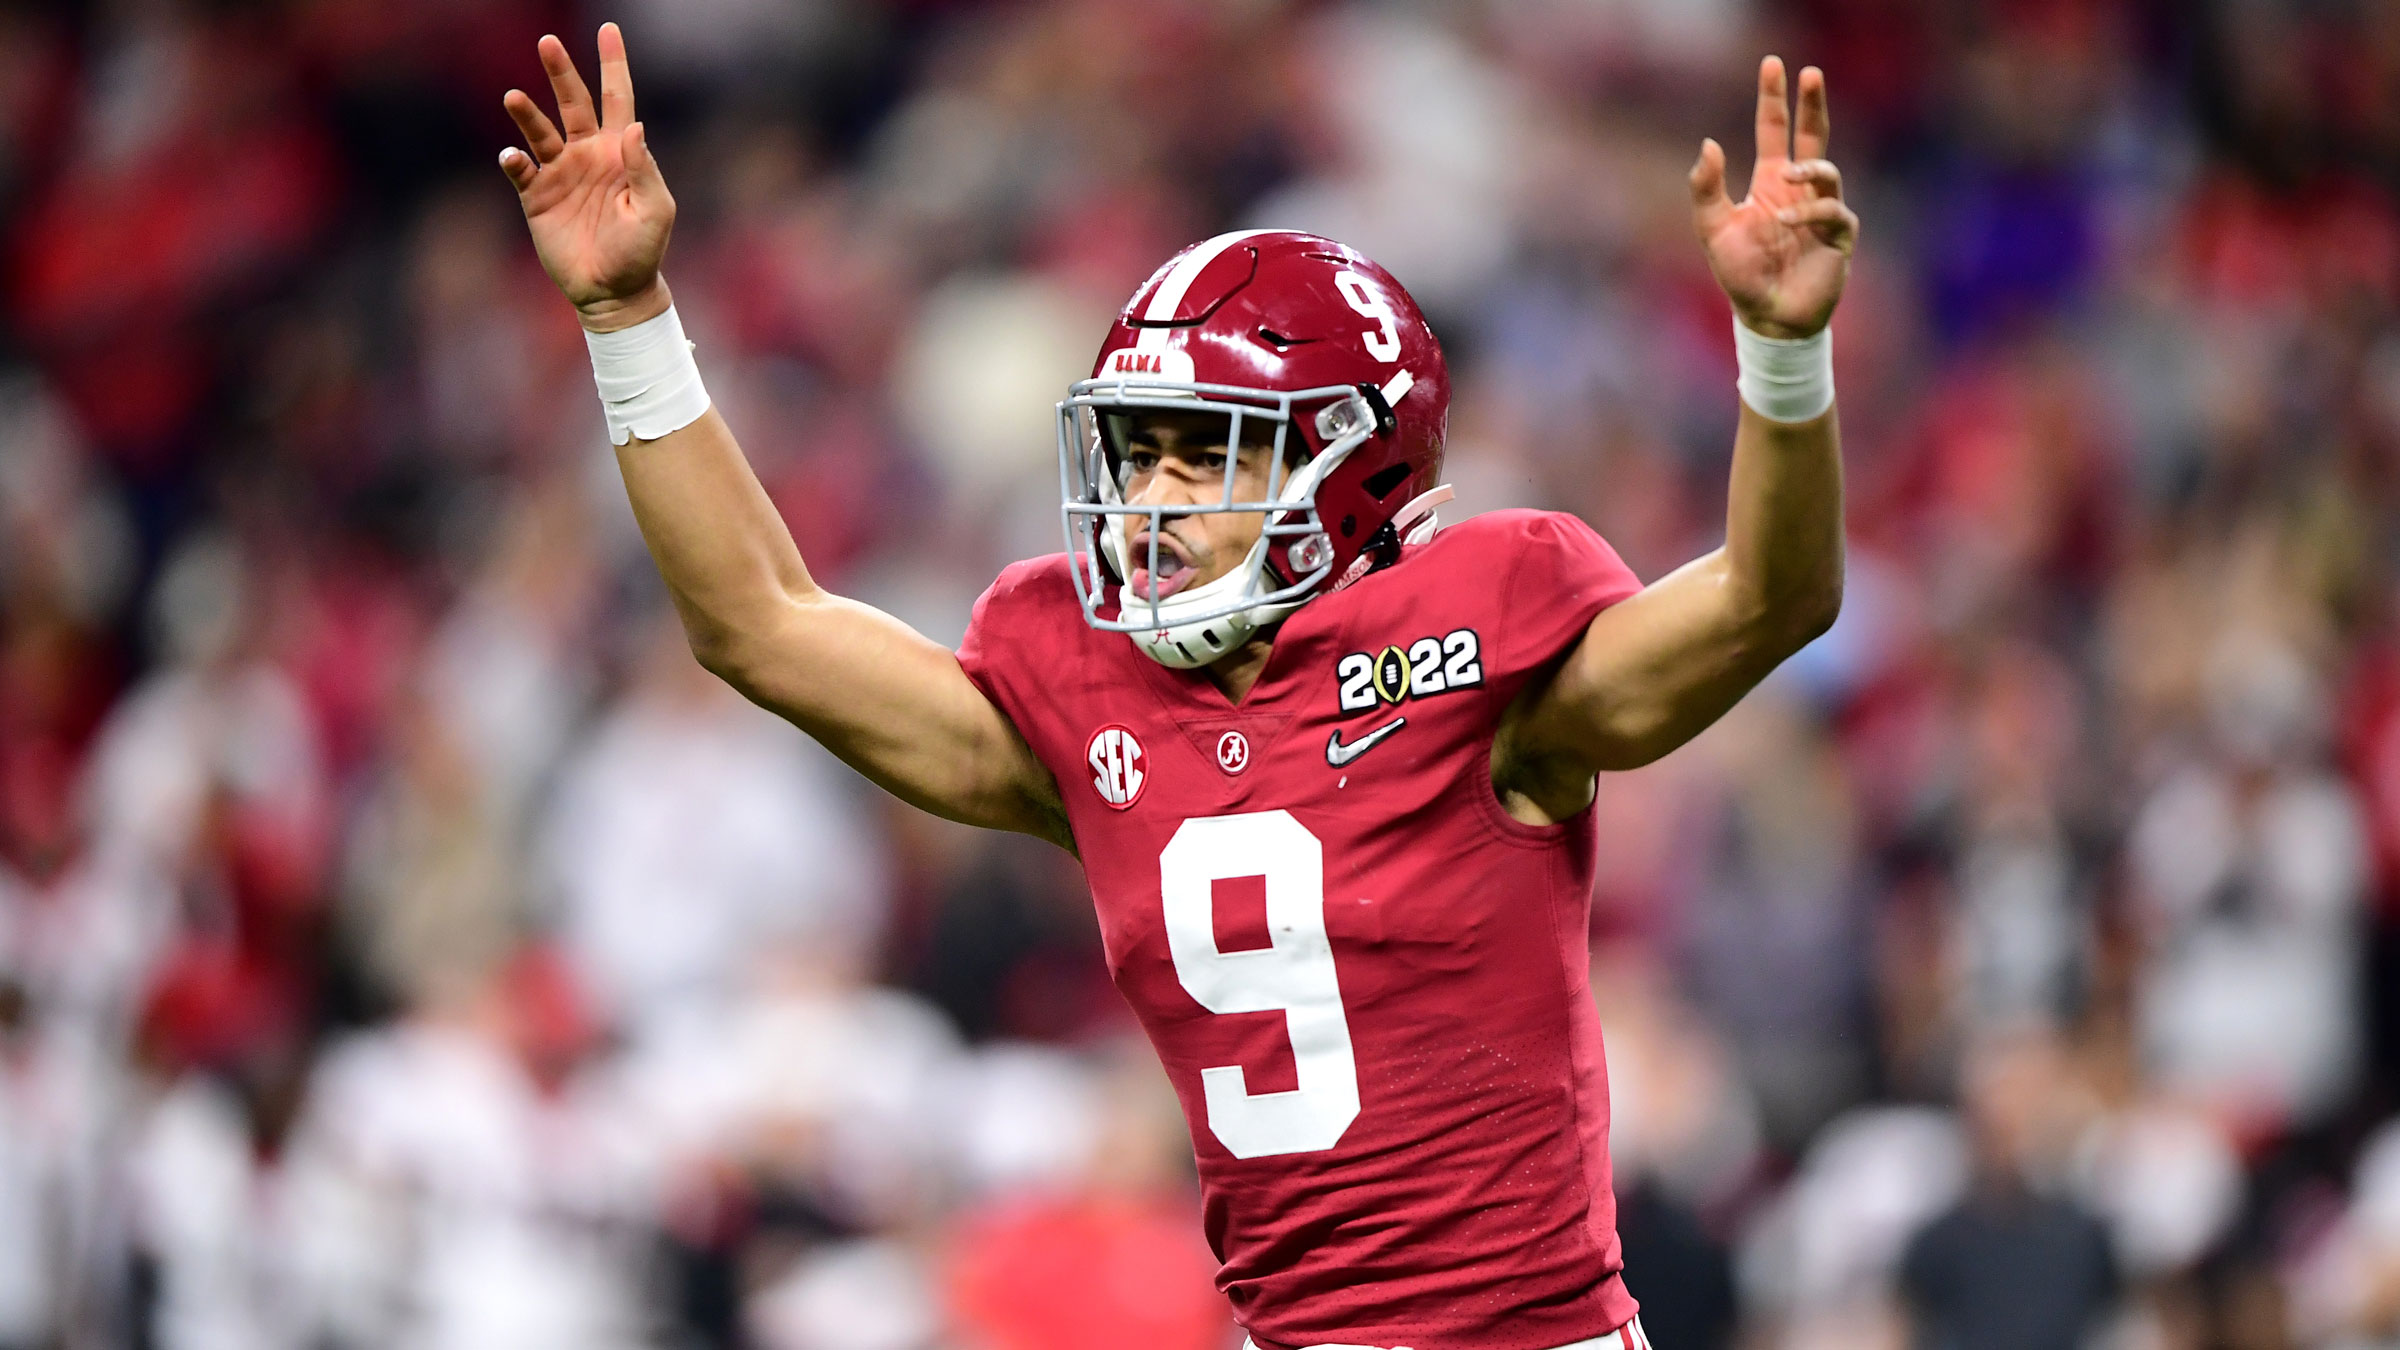 Quarterback Bryce Young reacts after throwing a touchdown pass in the fourth quarter to give Alabama the lead.